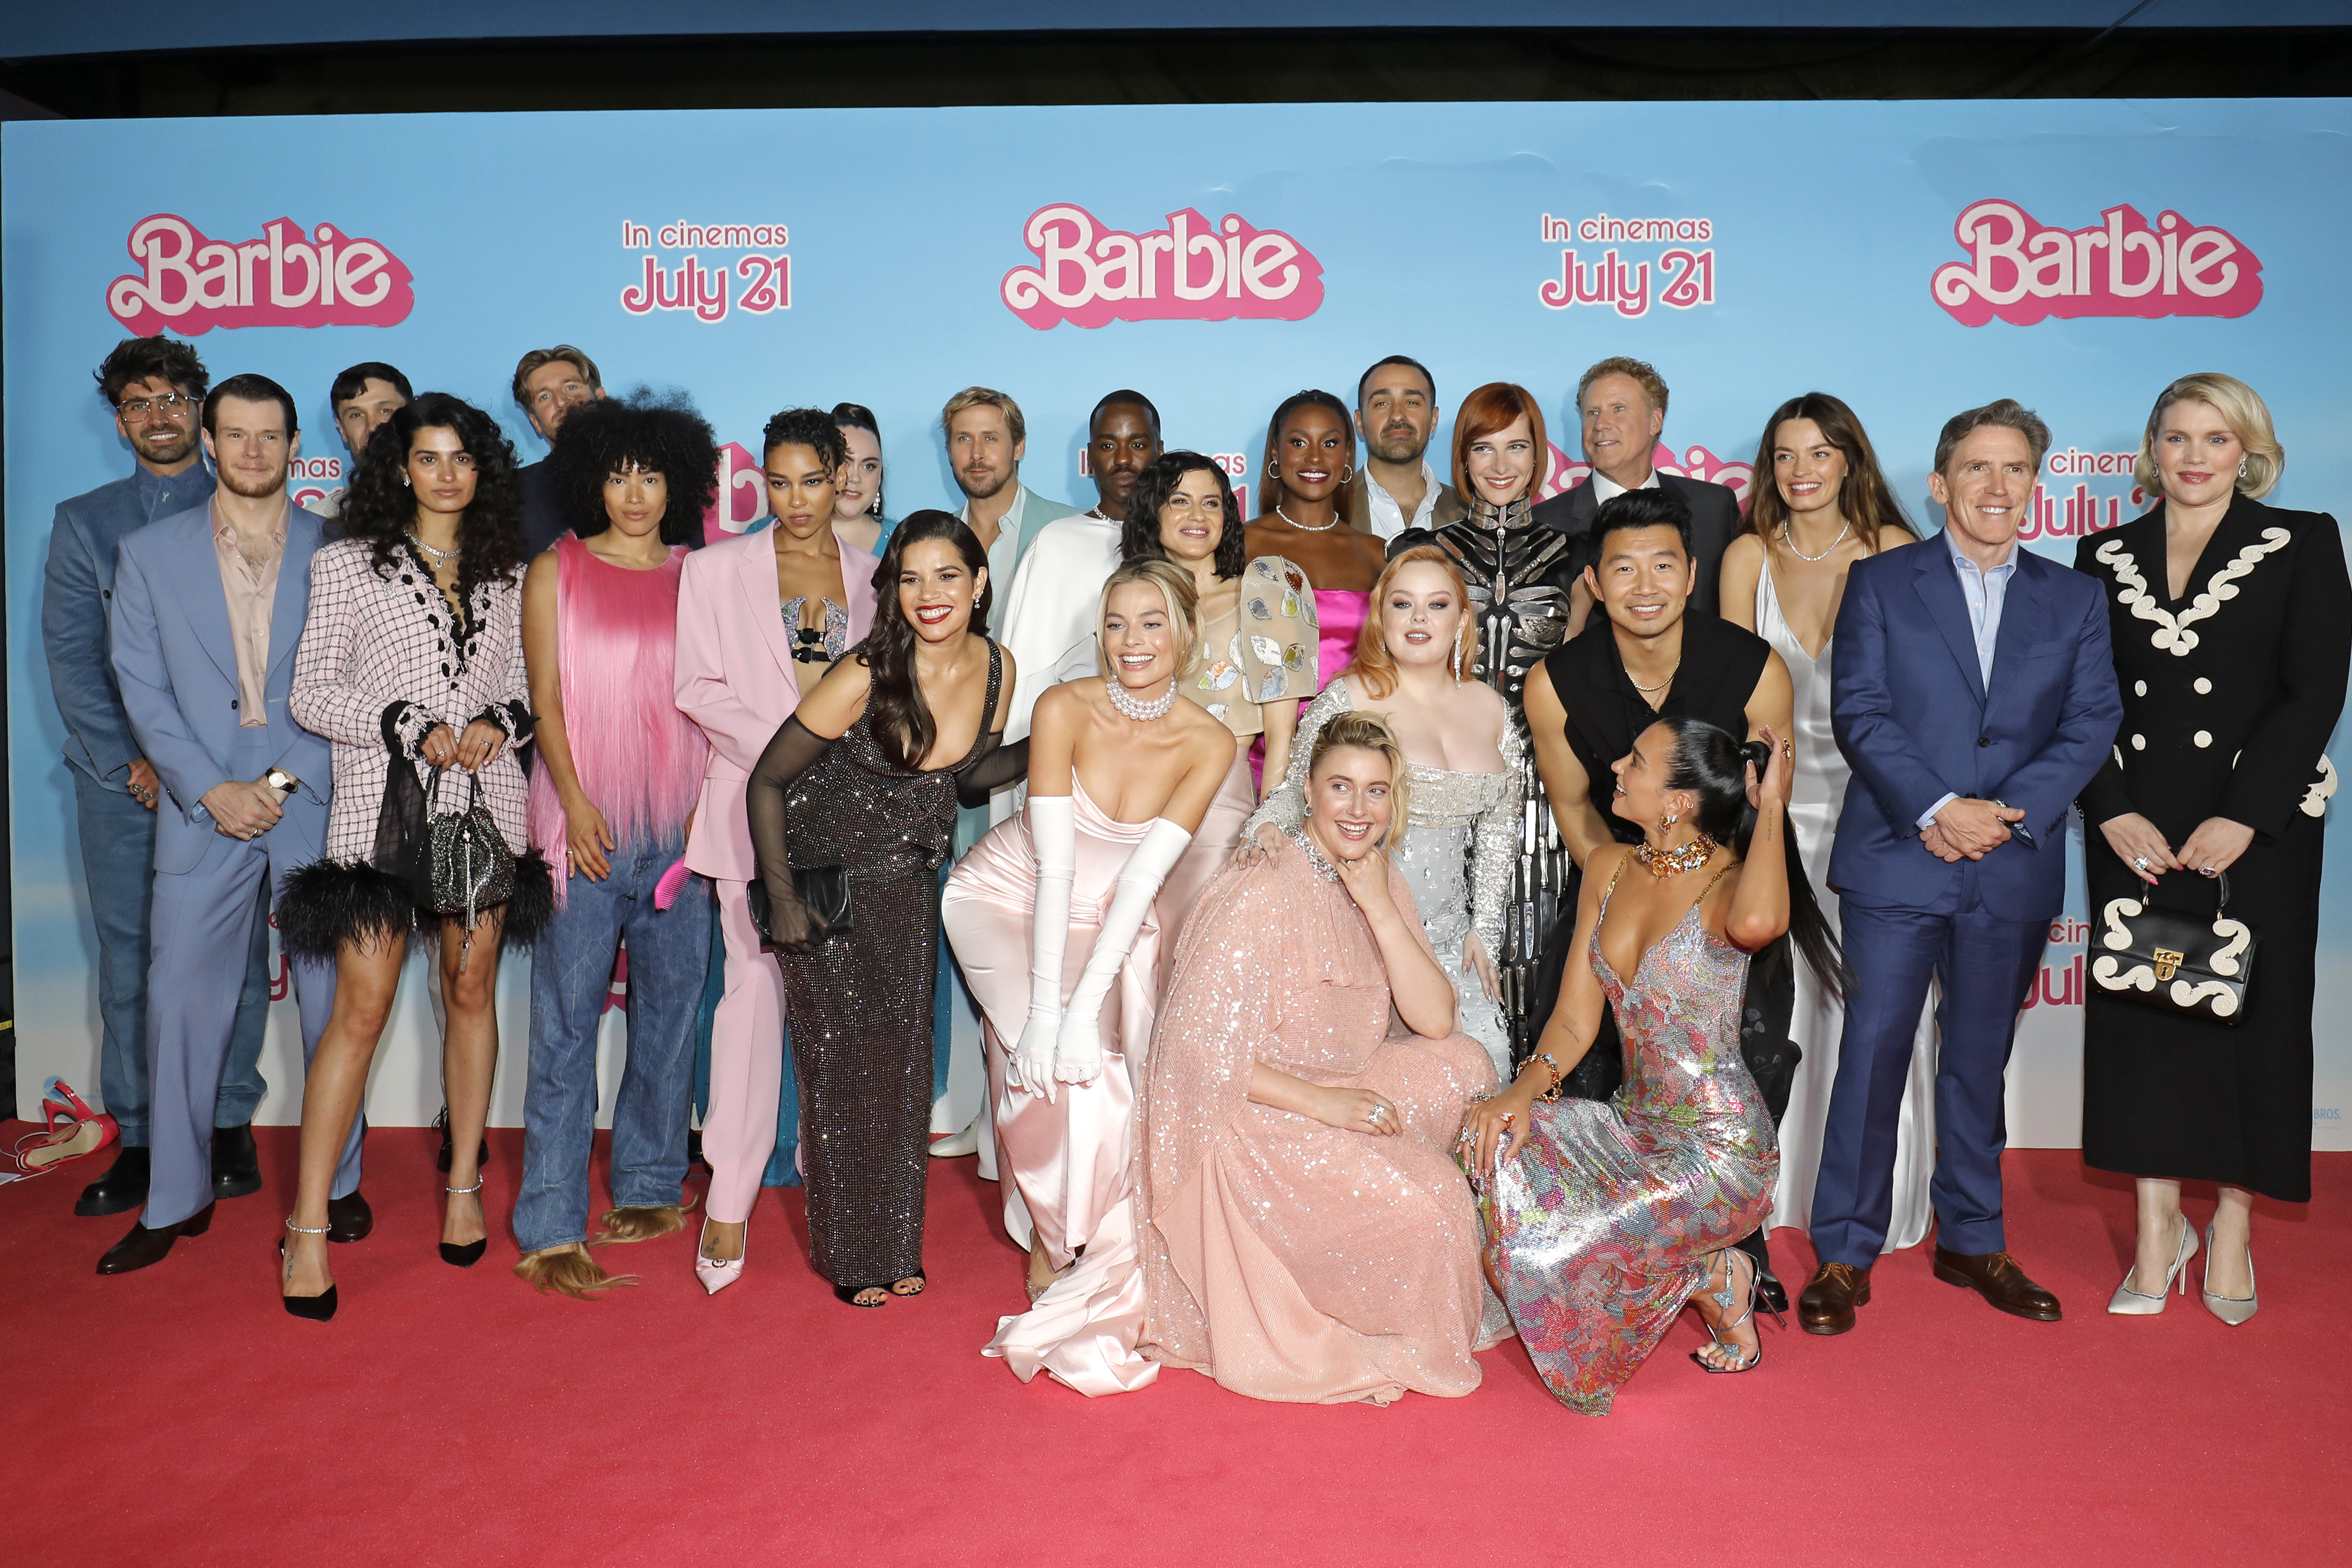 the large cast on the red carpet